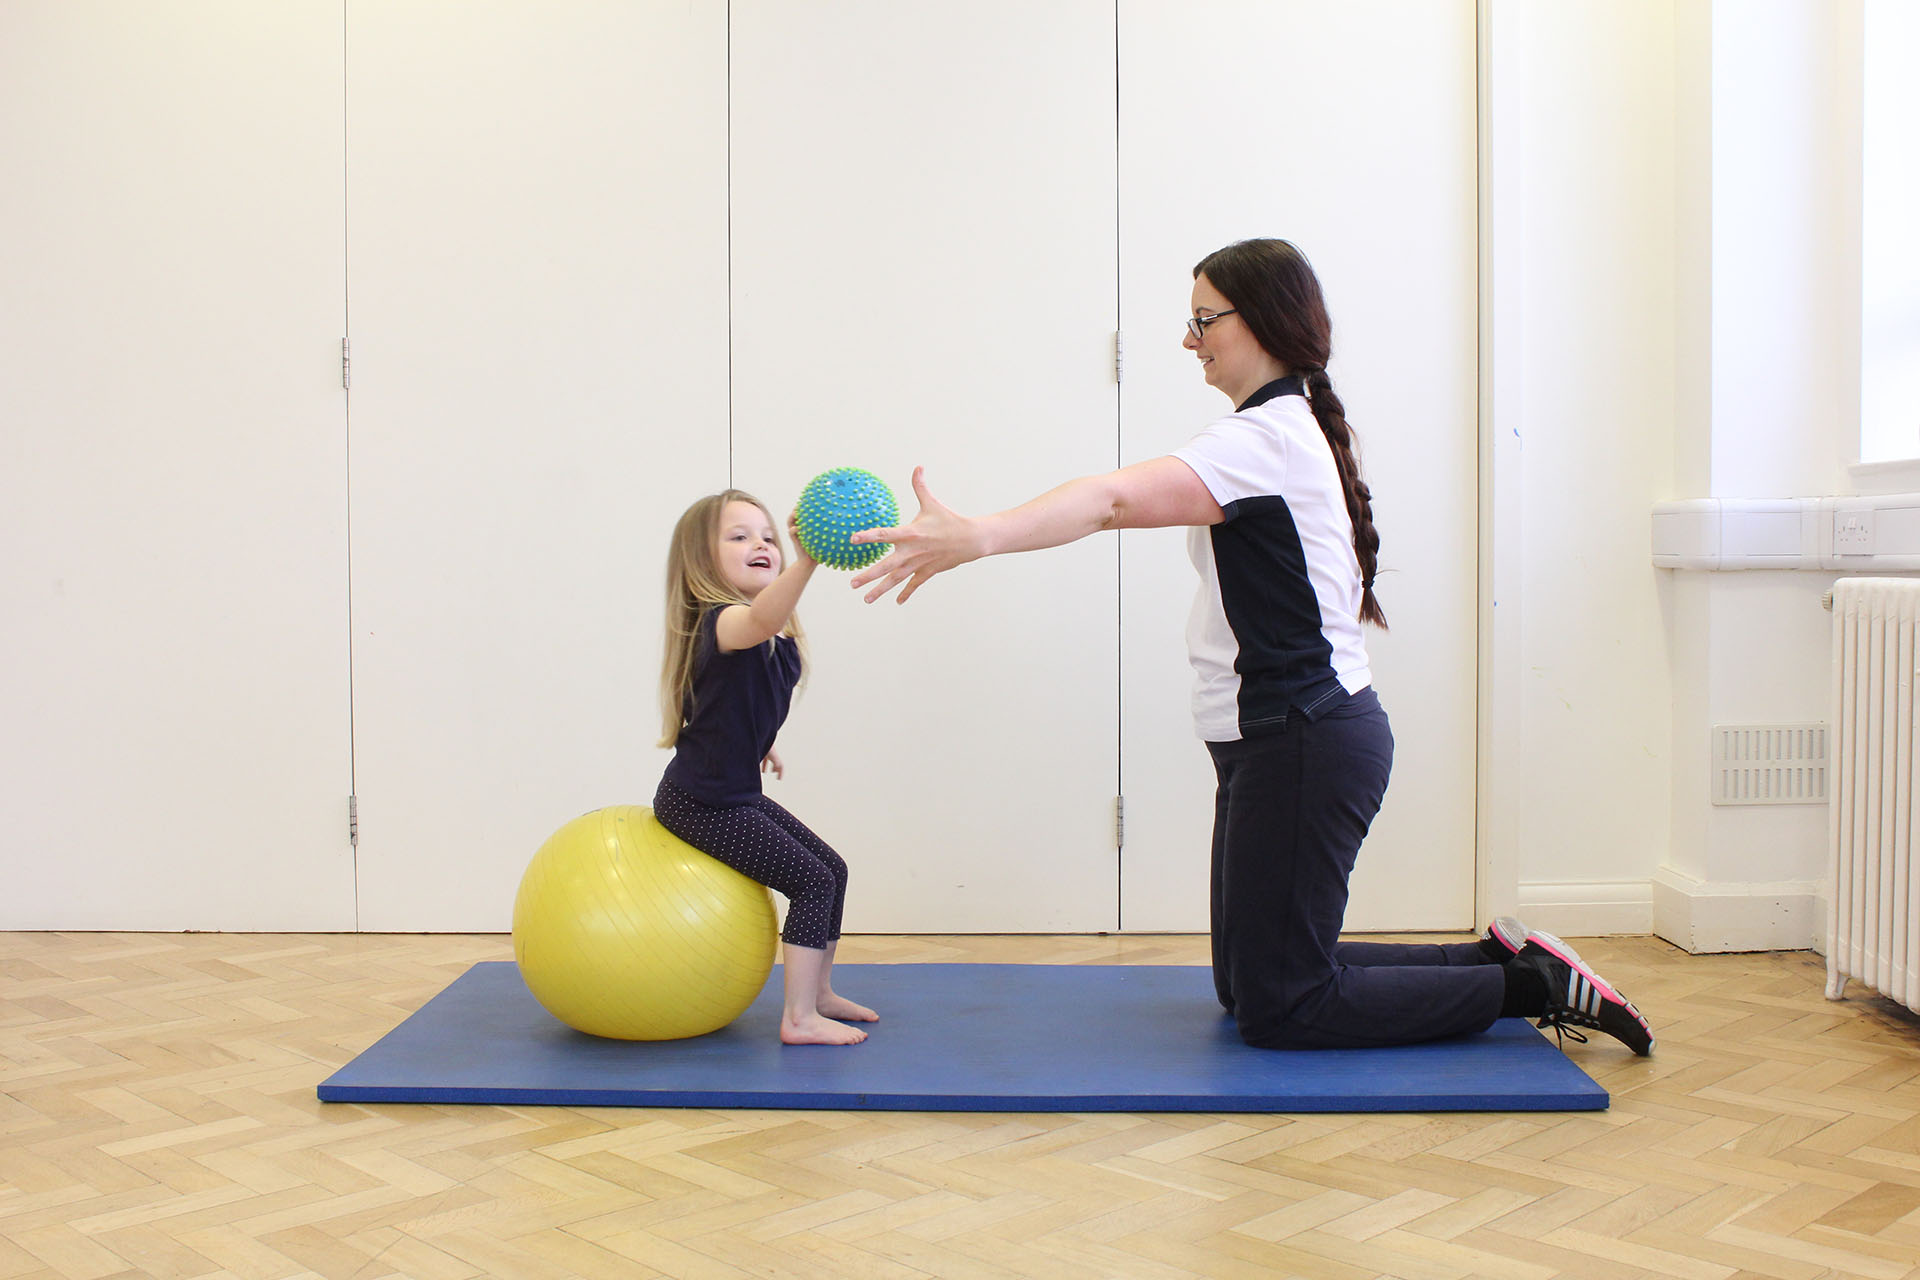 Child Physiotherapy Treatment in Manchester clinic